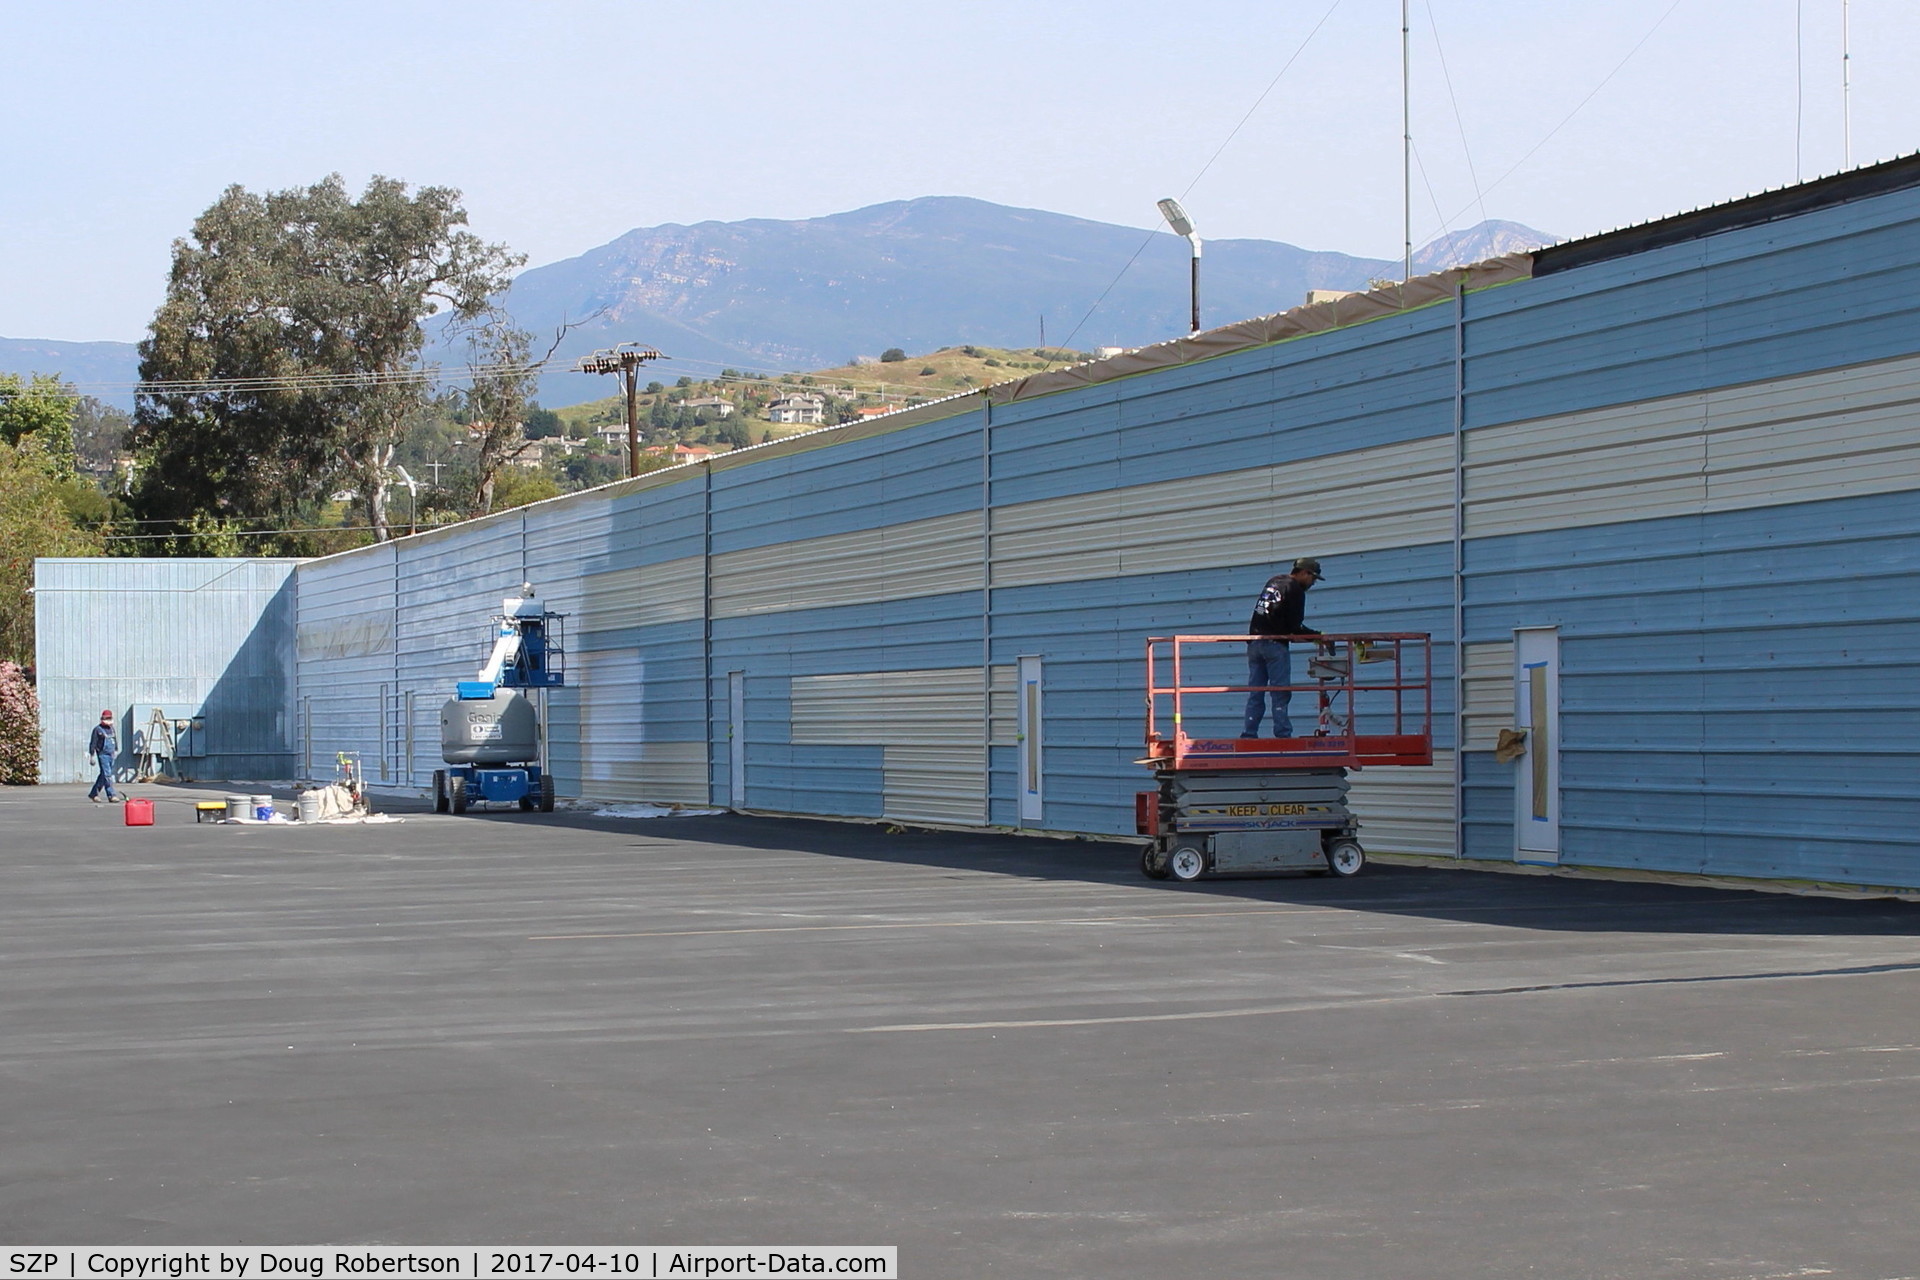 Santa Paula Airport (SZP) - Repainting Hangars in the western section of the airport; technically this is an off-original airport area. Hangar Owners here pay small fee annually to taxi to/from the 04-22 runway. 